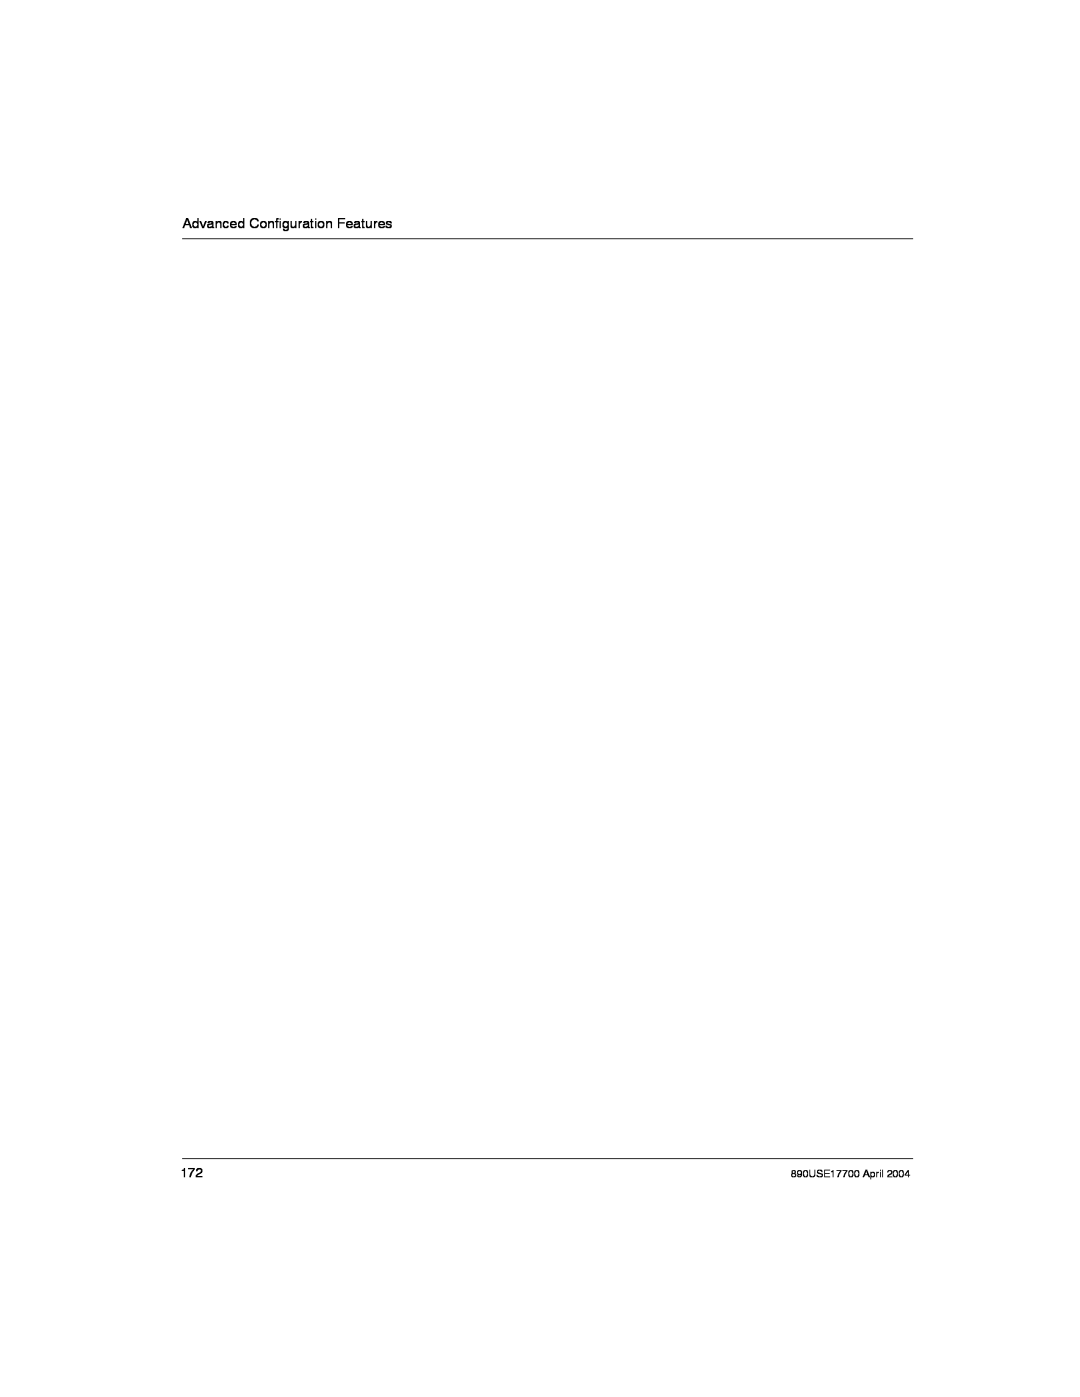 Schneider Electric manual Advanced Configuration Features, 890USE17700 April 